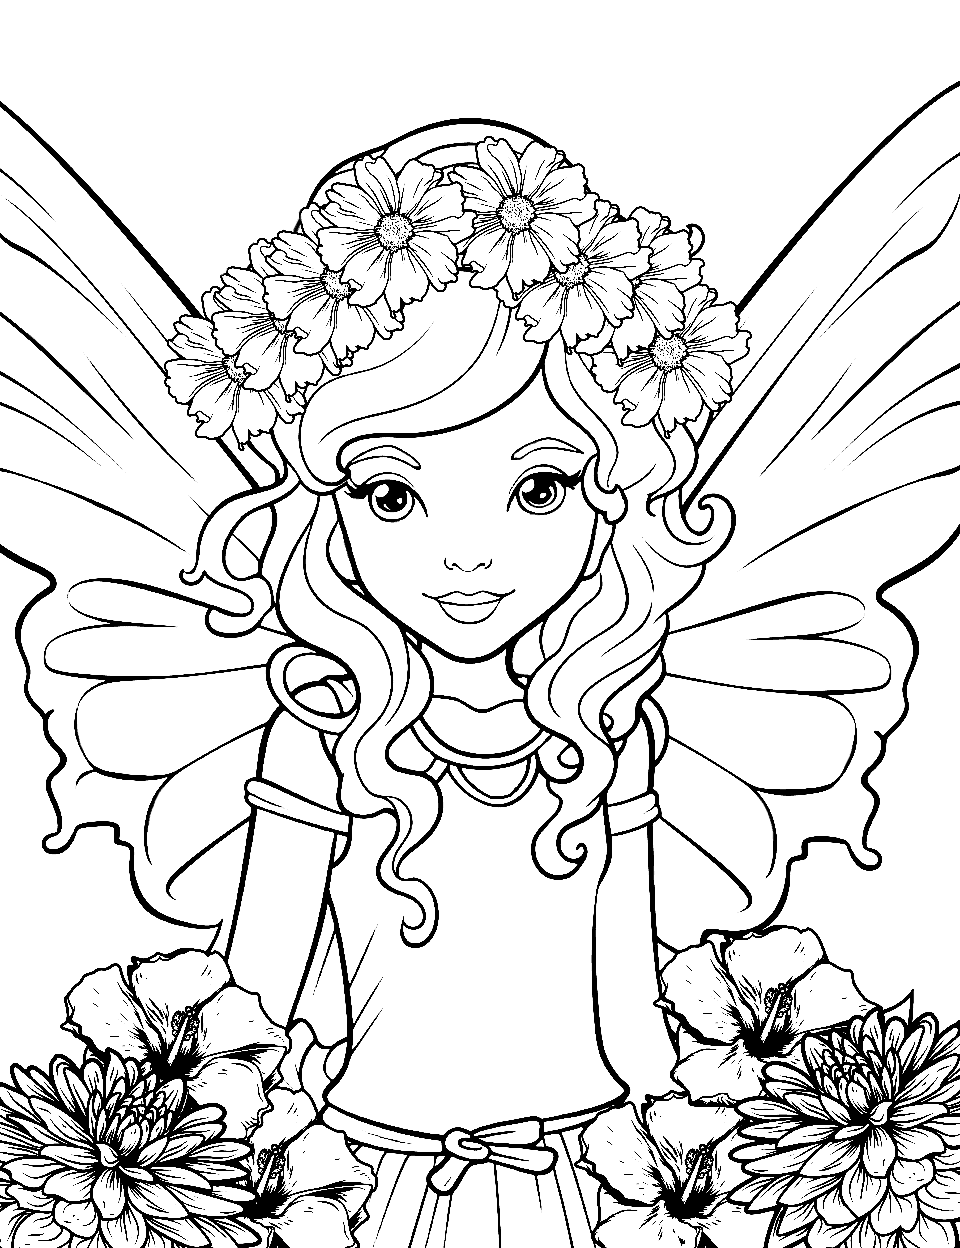 Fairy Elf with Butterfly Wings Coloring Page - A fairy elf with delicate butterfly wings in a flower garden.